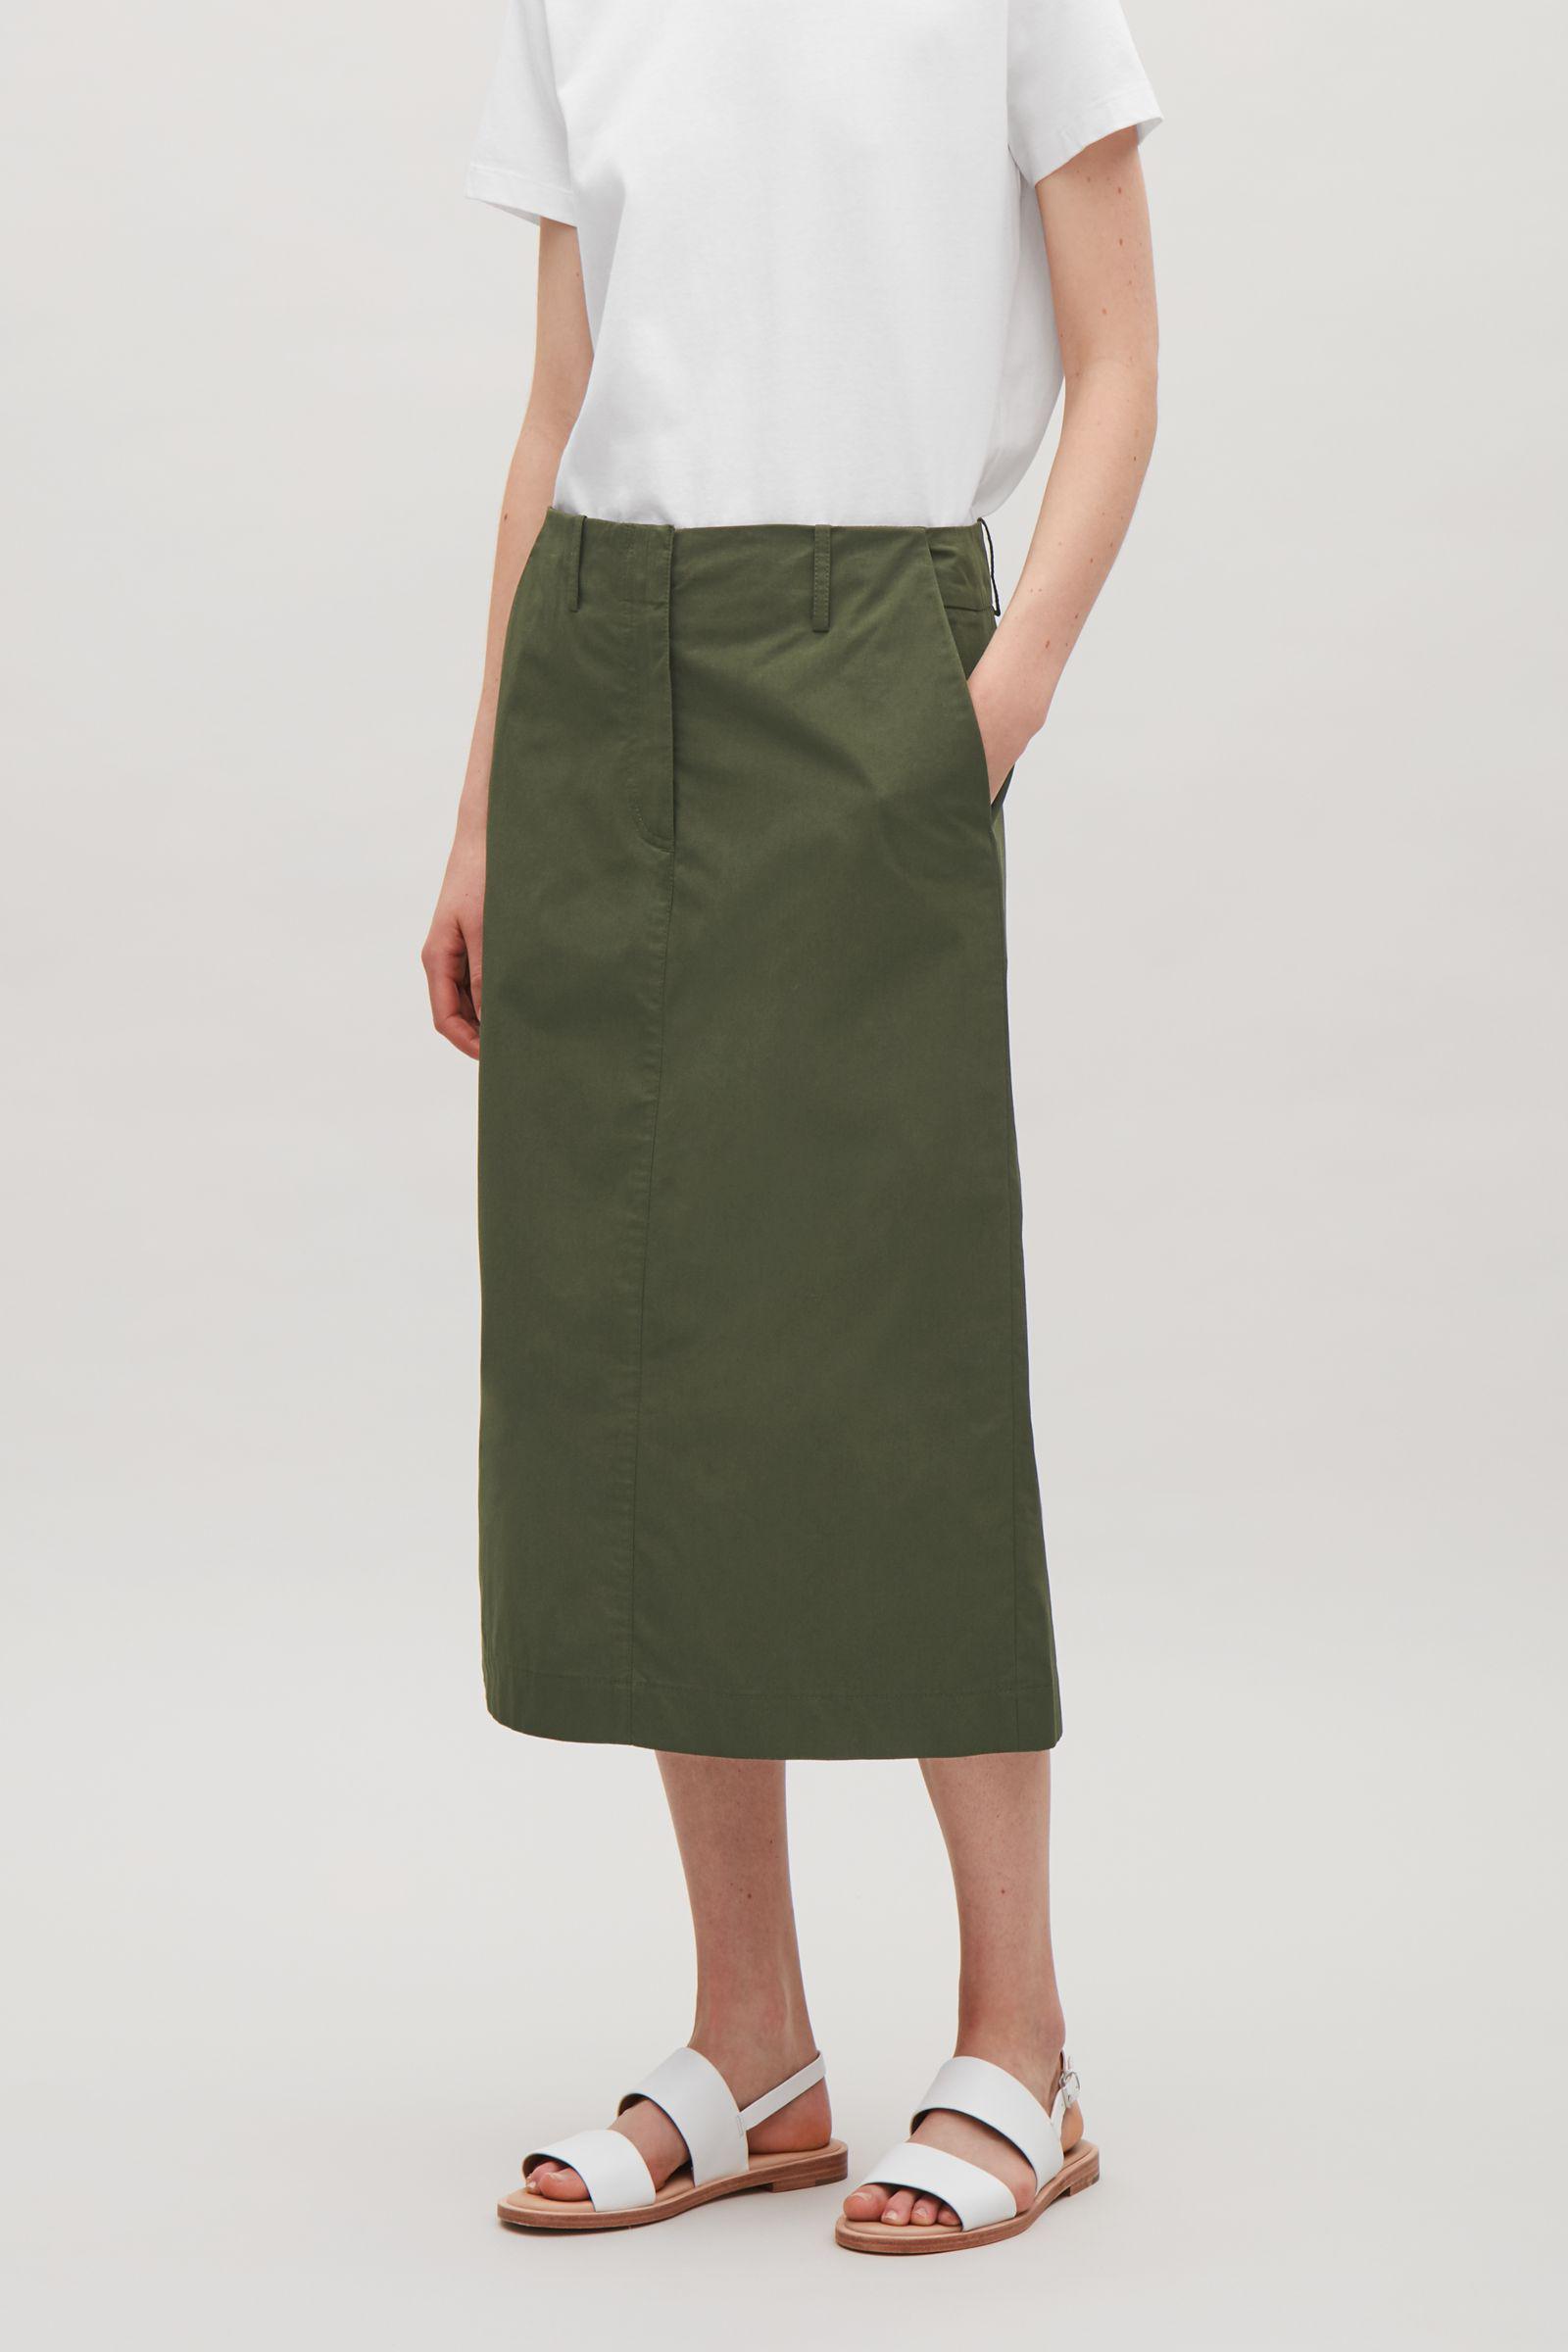 COS A-line Skirt in Green | Lyst